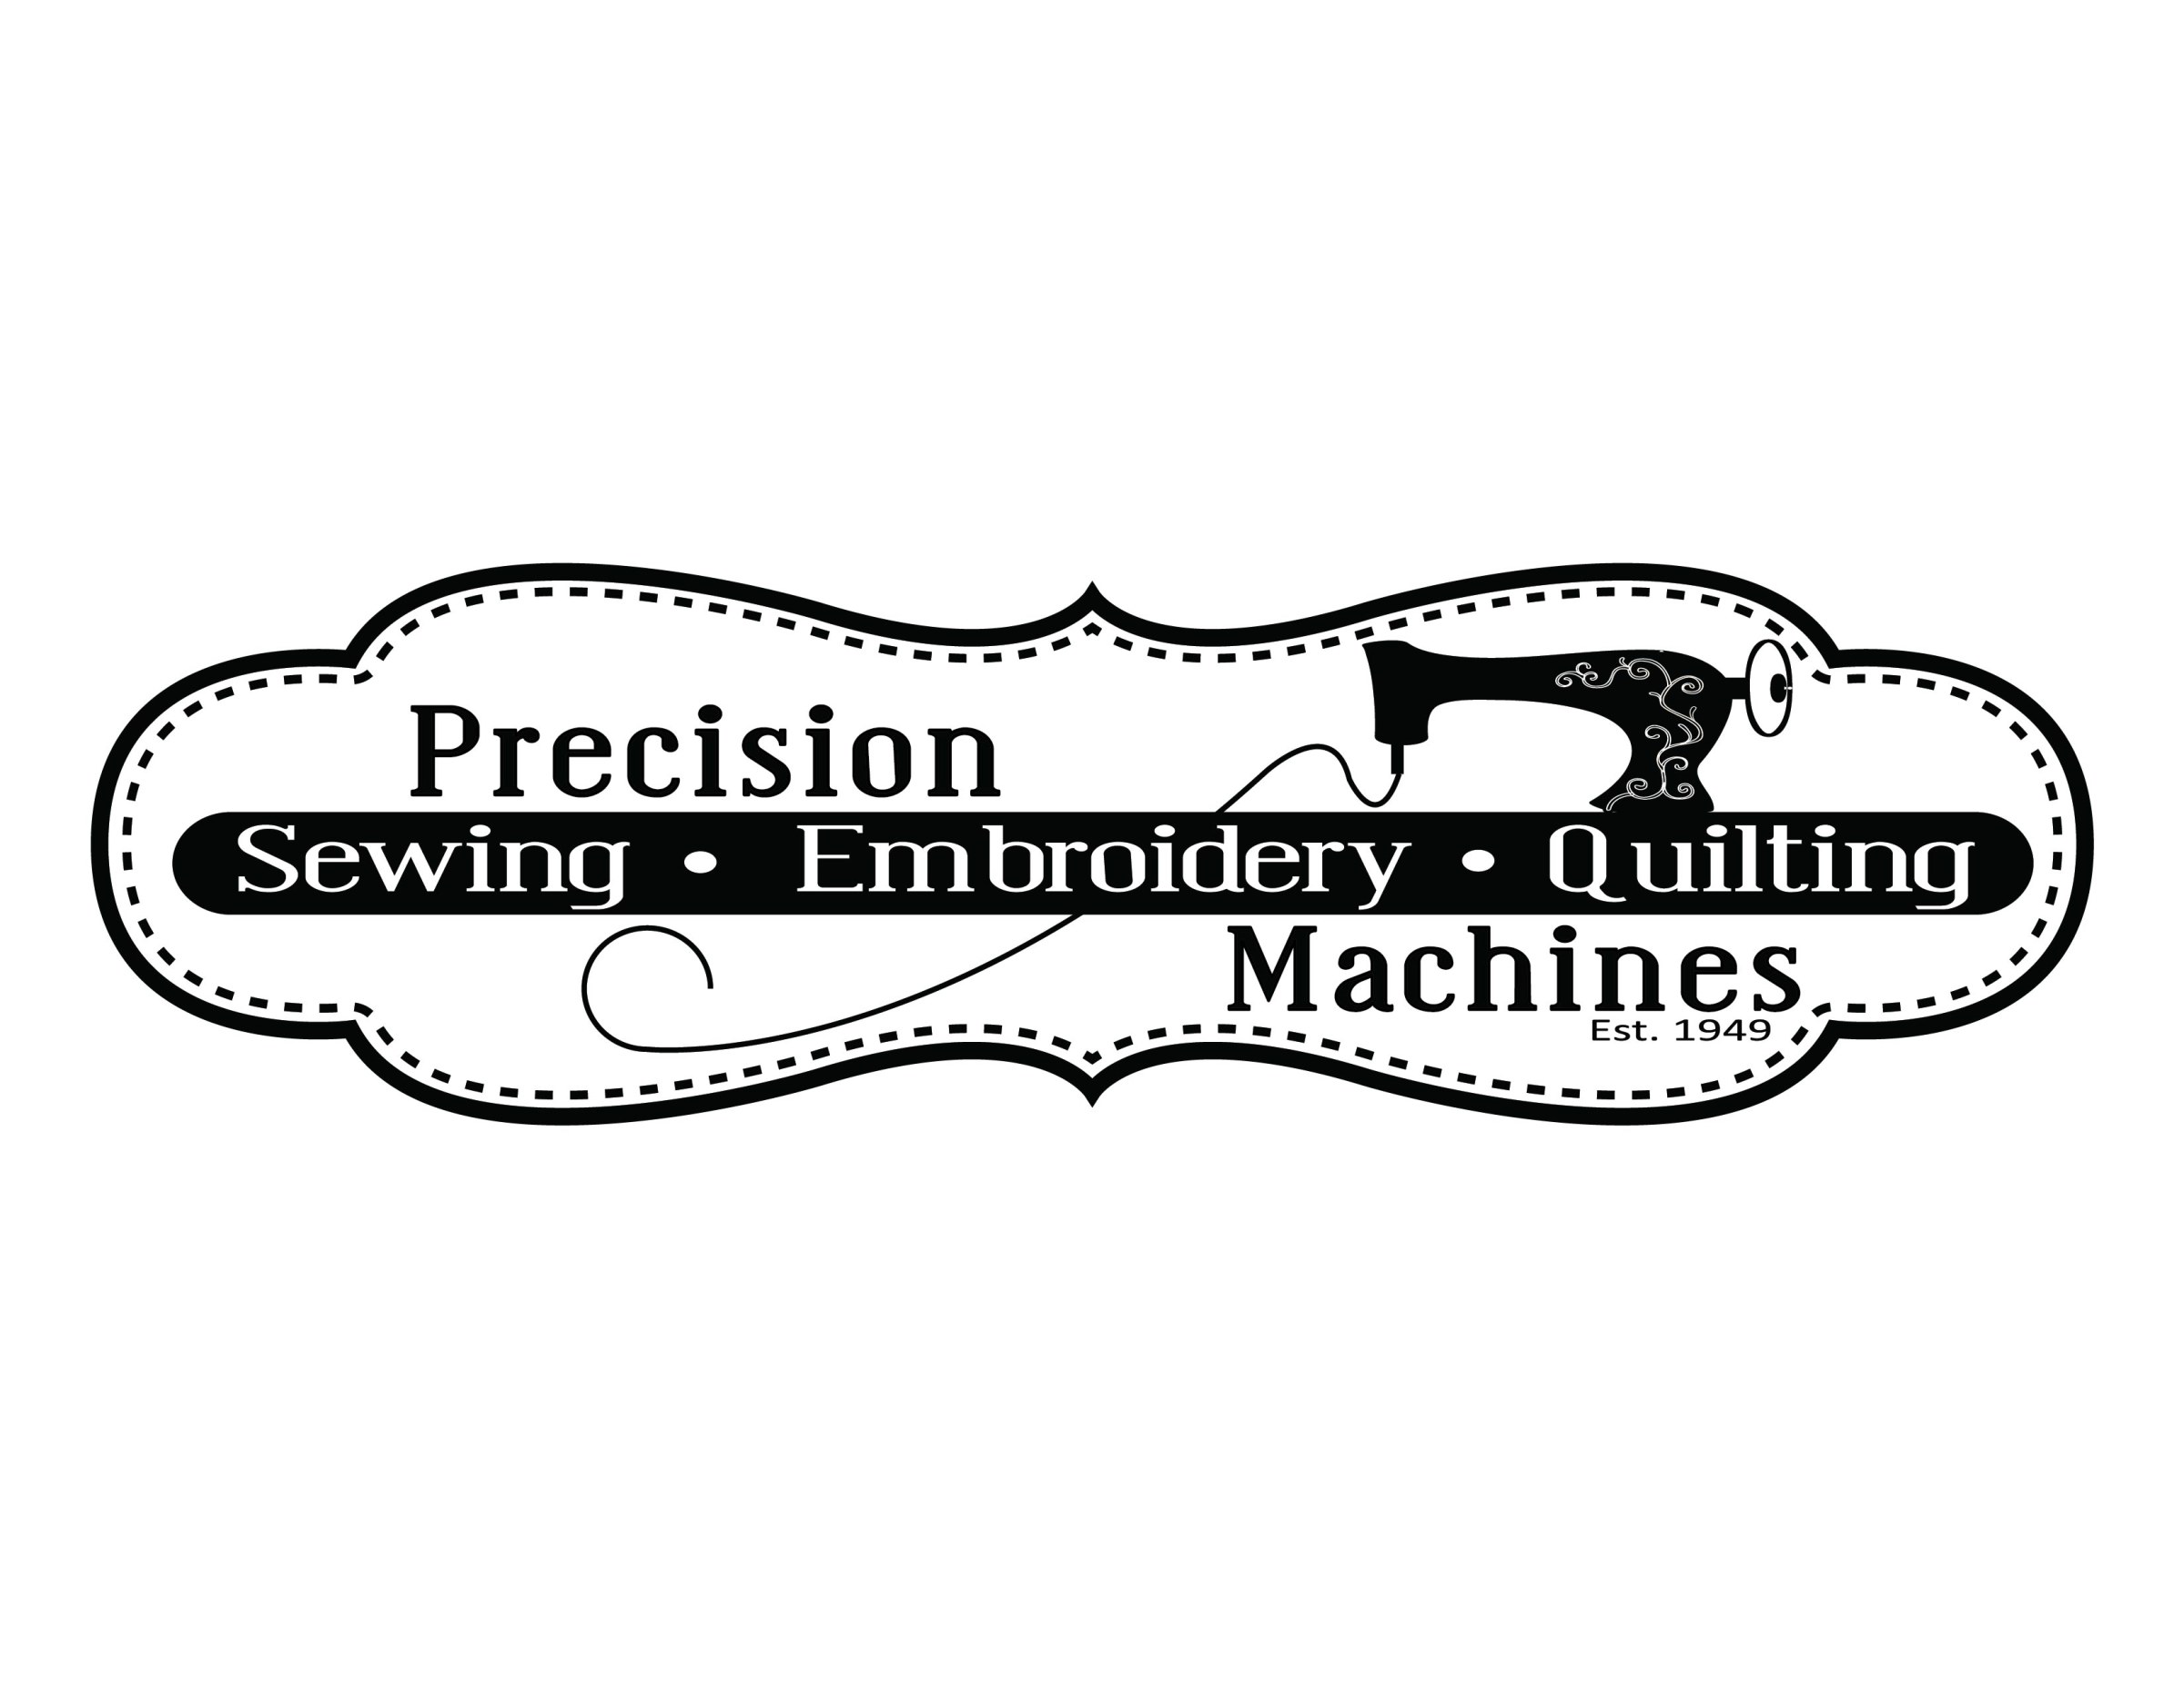 Company logo for Precision Sewing Machines